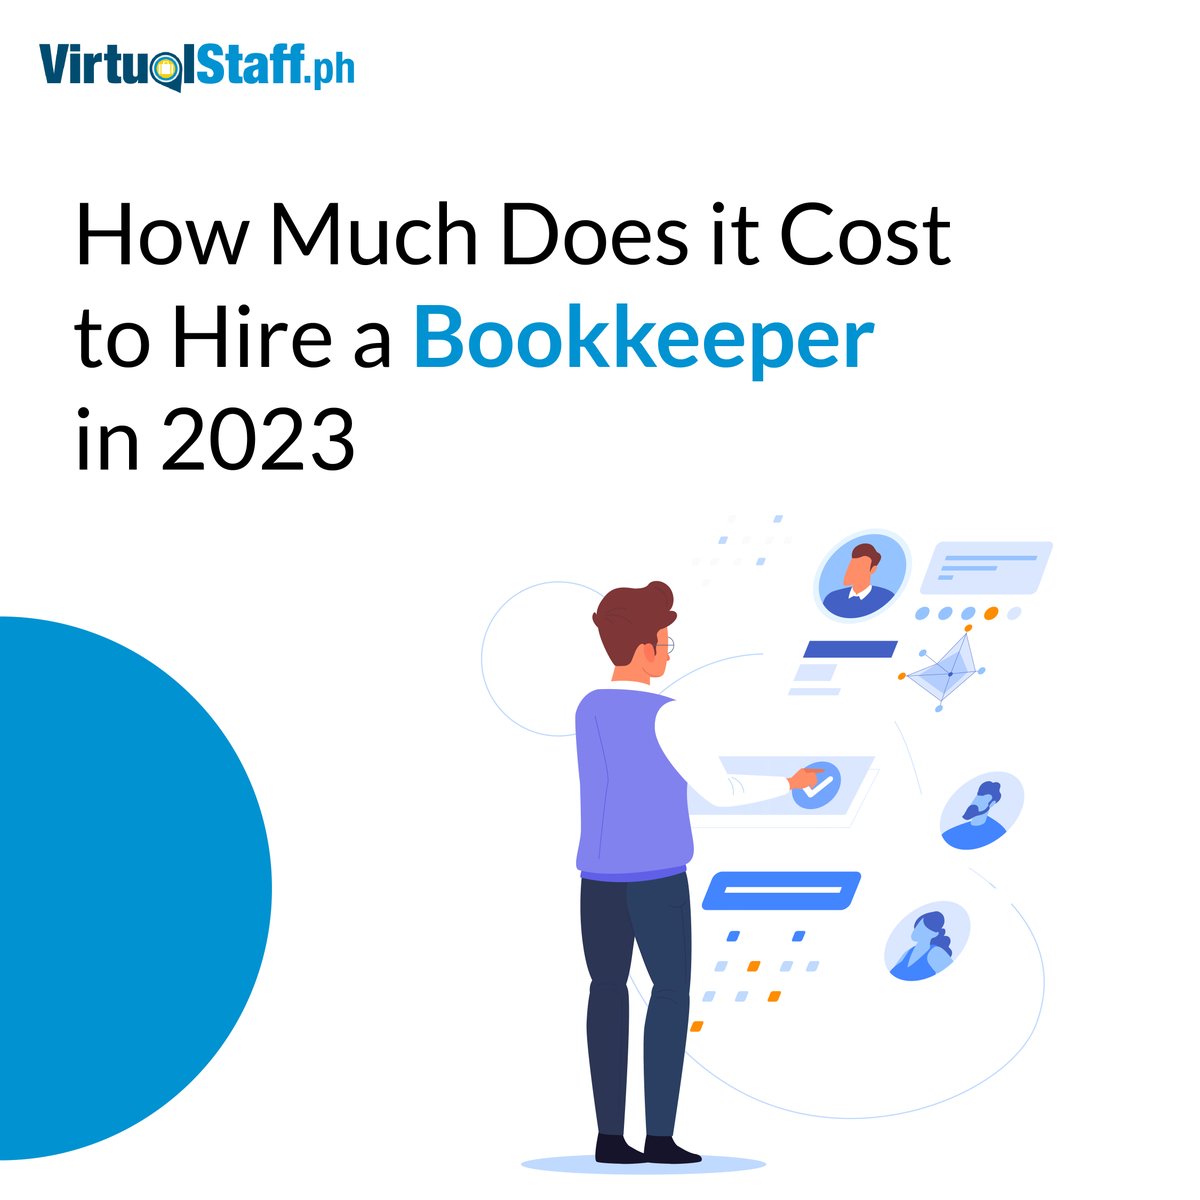 Looking to hire a Bookkeeper for your business?

Use our salary calculator to get the estimates: virtualstaff.ph/virtual-staff-…

#outsourcing #outsourcingsolutions #philippines #bookkeeper #bookkeeping #virtualassistants #virtualassistantservices #outsourcingservices #humaresources